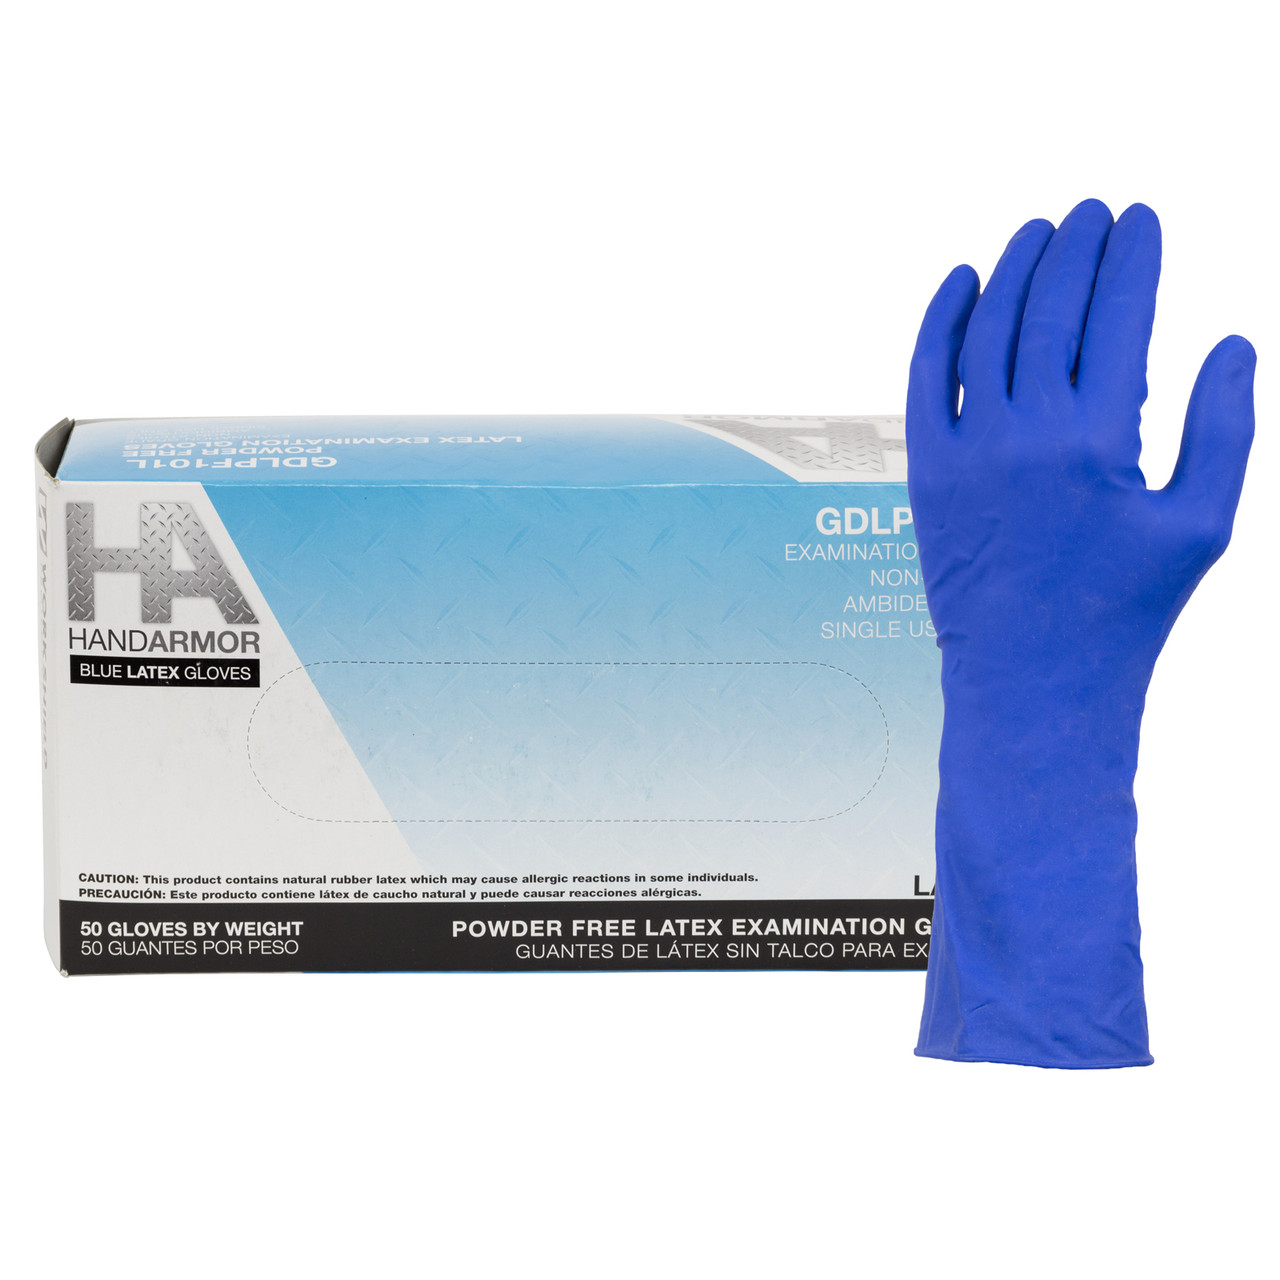 https://cdn11.bigcommerce.com/s-a5uwe4c7wz/images/stencil/1280x1280/products/885/2649/Hand-Armor-Blue-Latex-Gloves-Powder-Free-13-Mil-Case-Of-500-Glove-Box__75097.1698429192.jpg?c=1